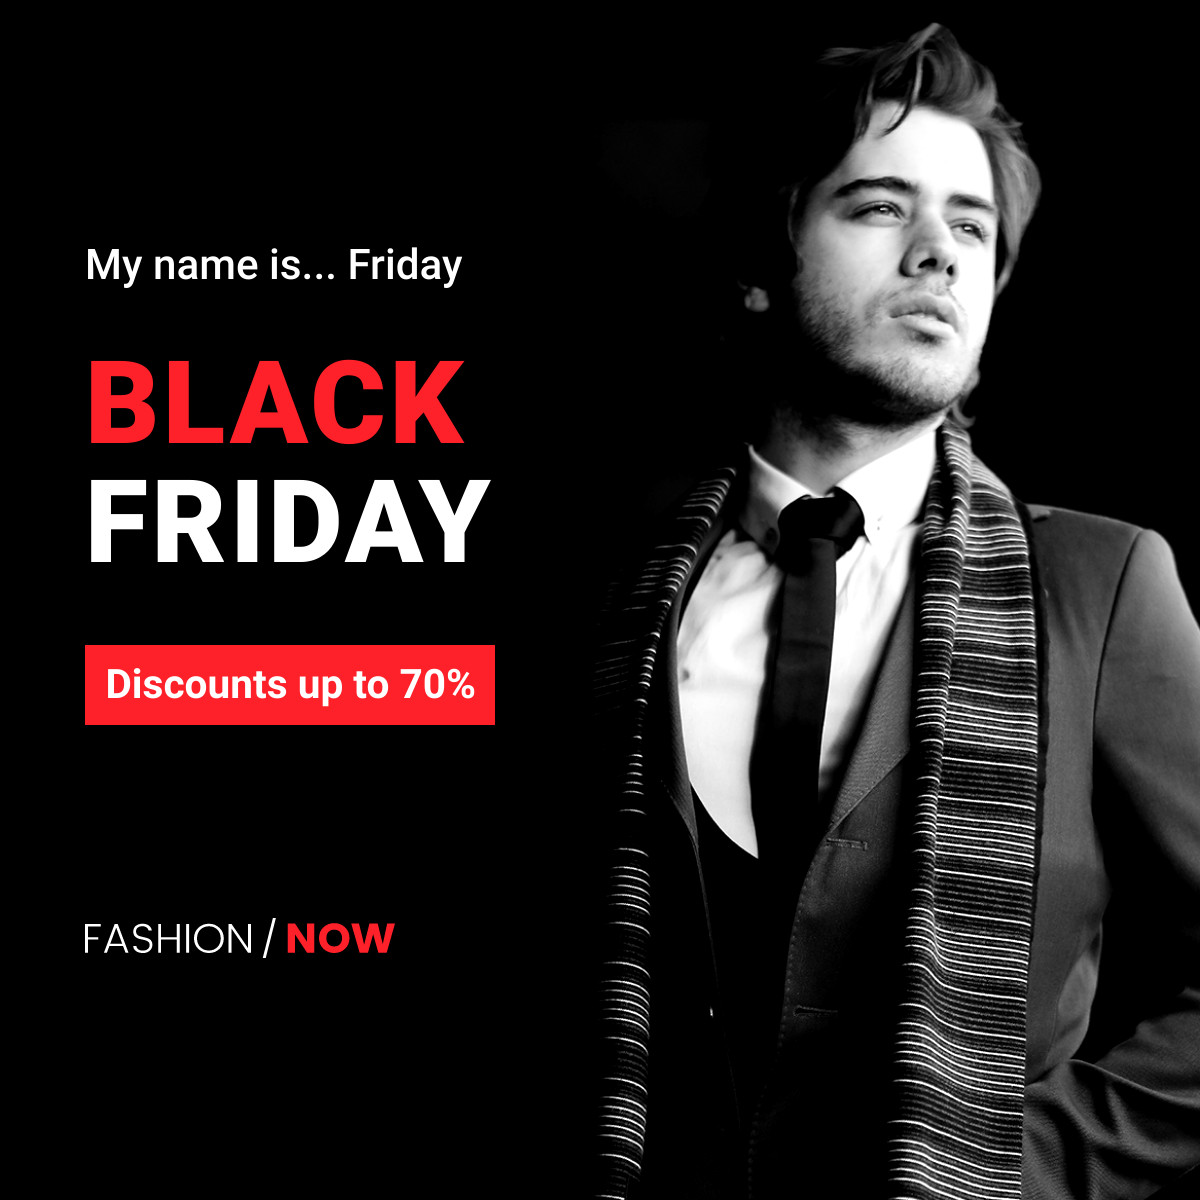 My Name is Black Friday